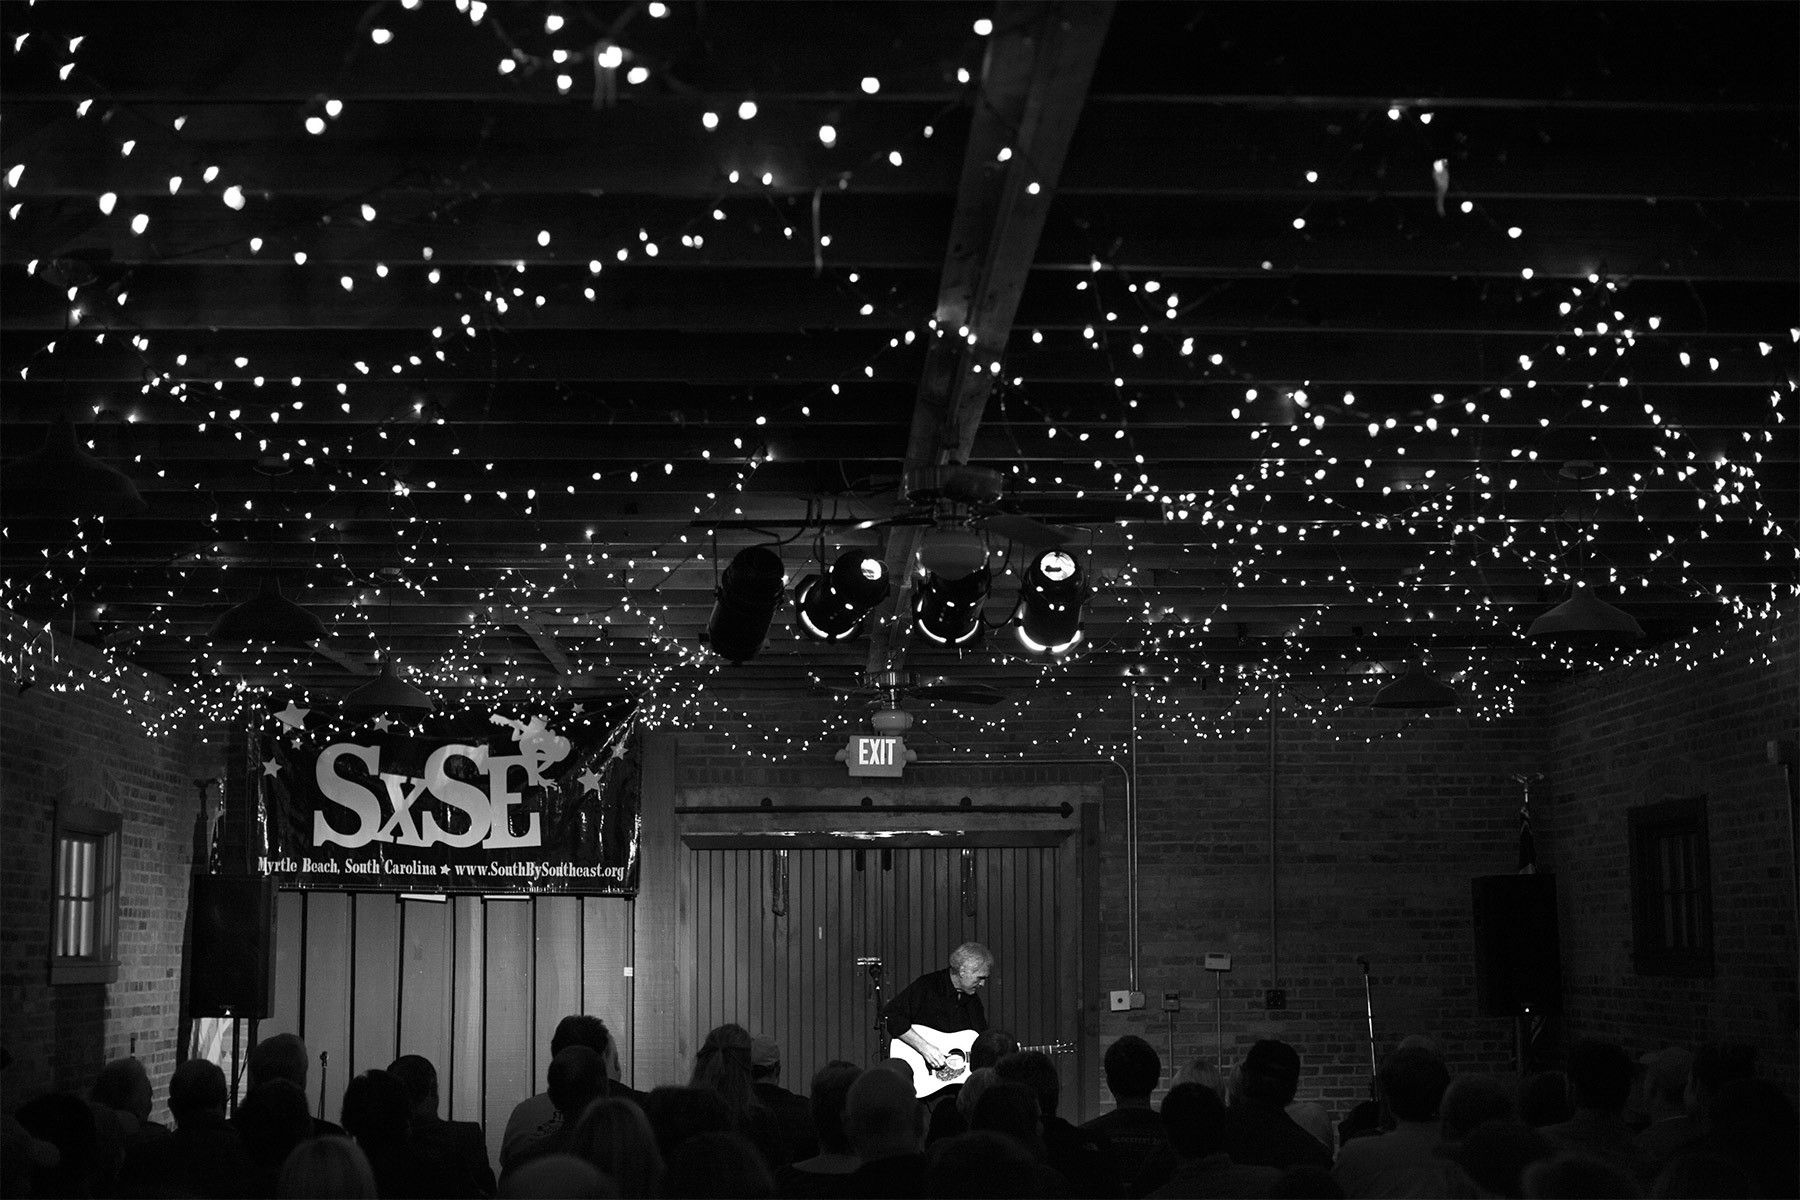 A SXSE favorite, Oklahoma born songwriter Verlon Thompson has played the series three times since it was started. He has been  a professional songwriter and traveling troubadour for 30 years and served as the trusted sidekick of the late Texas Americana songwriting icon Guy Clark. This photo was from his performance in November of 2012.